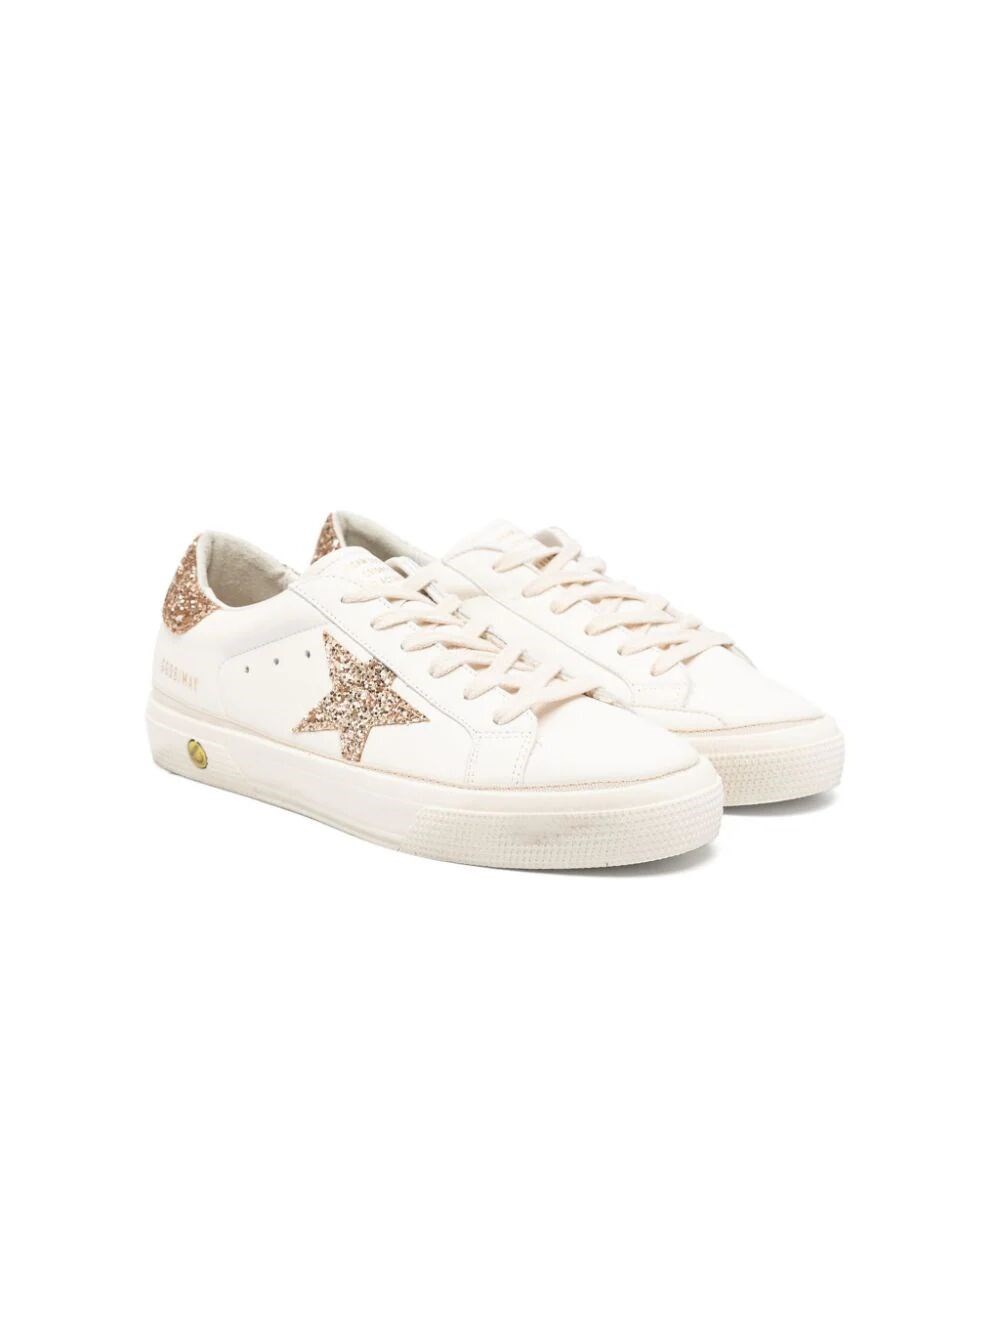 GOLDEN GOOSE MAY GLITTER SNEAKERS